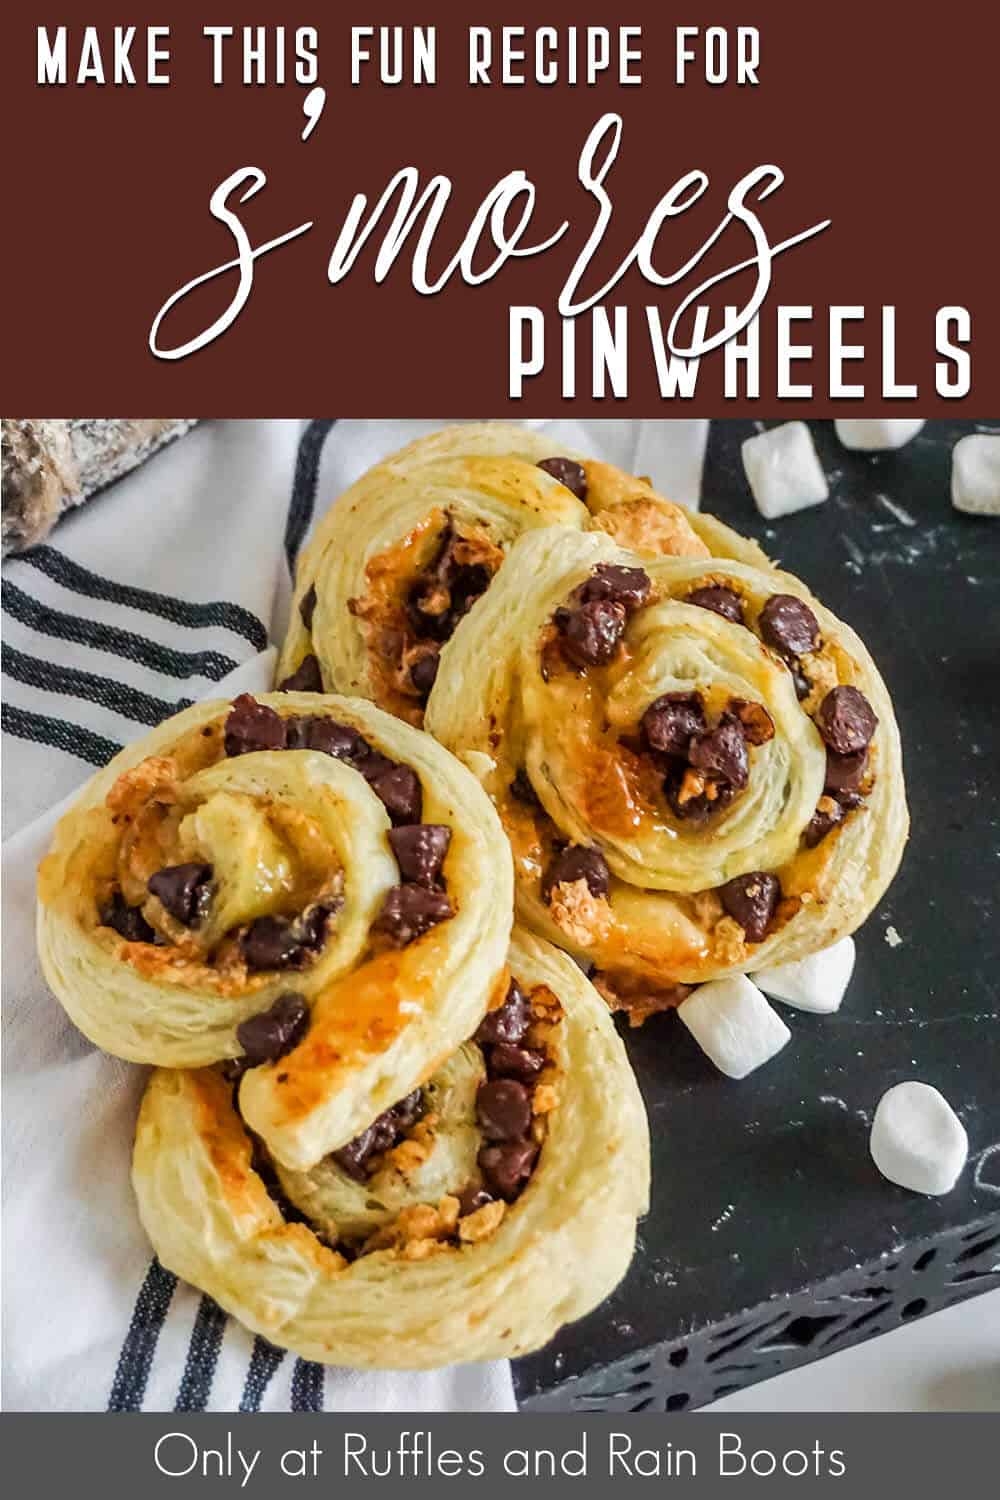 smores pinwheels recipe with text which reads make these fun recipe for s'mores pinwheels